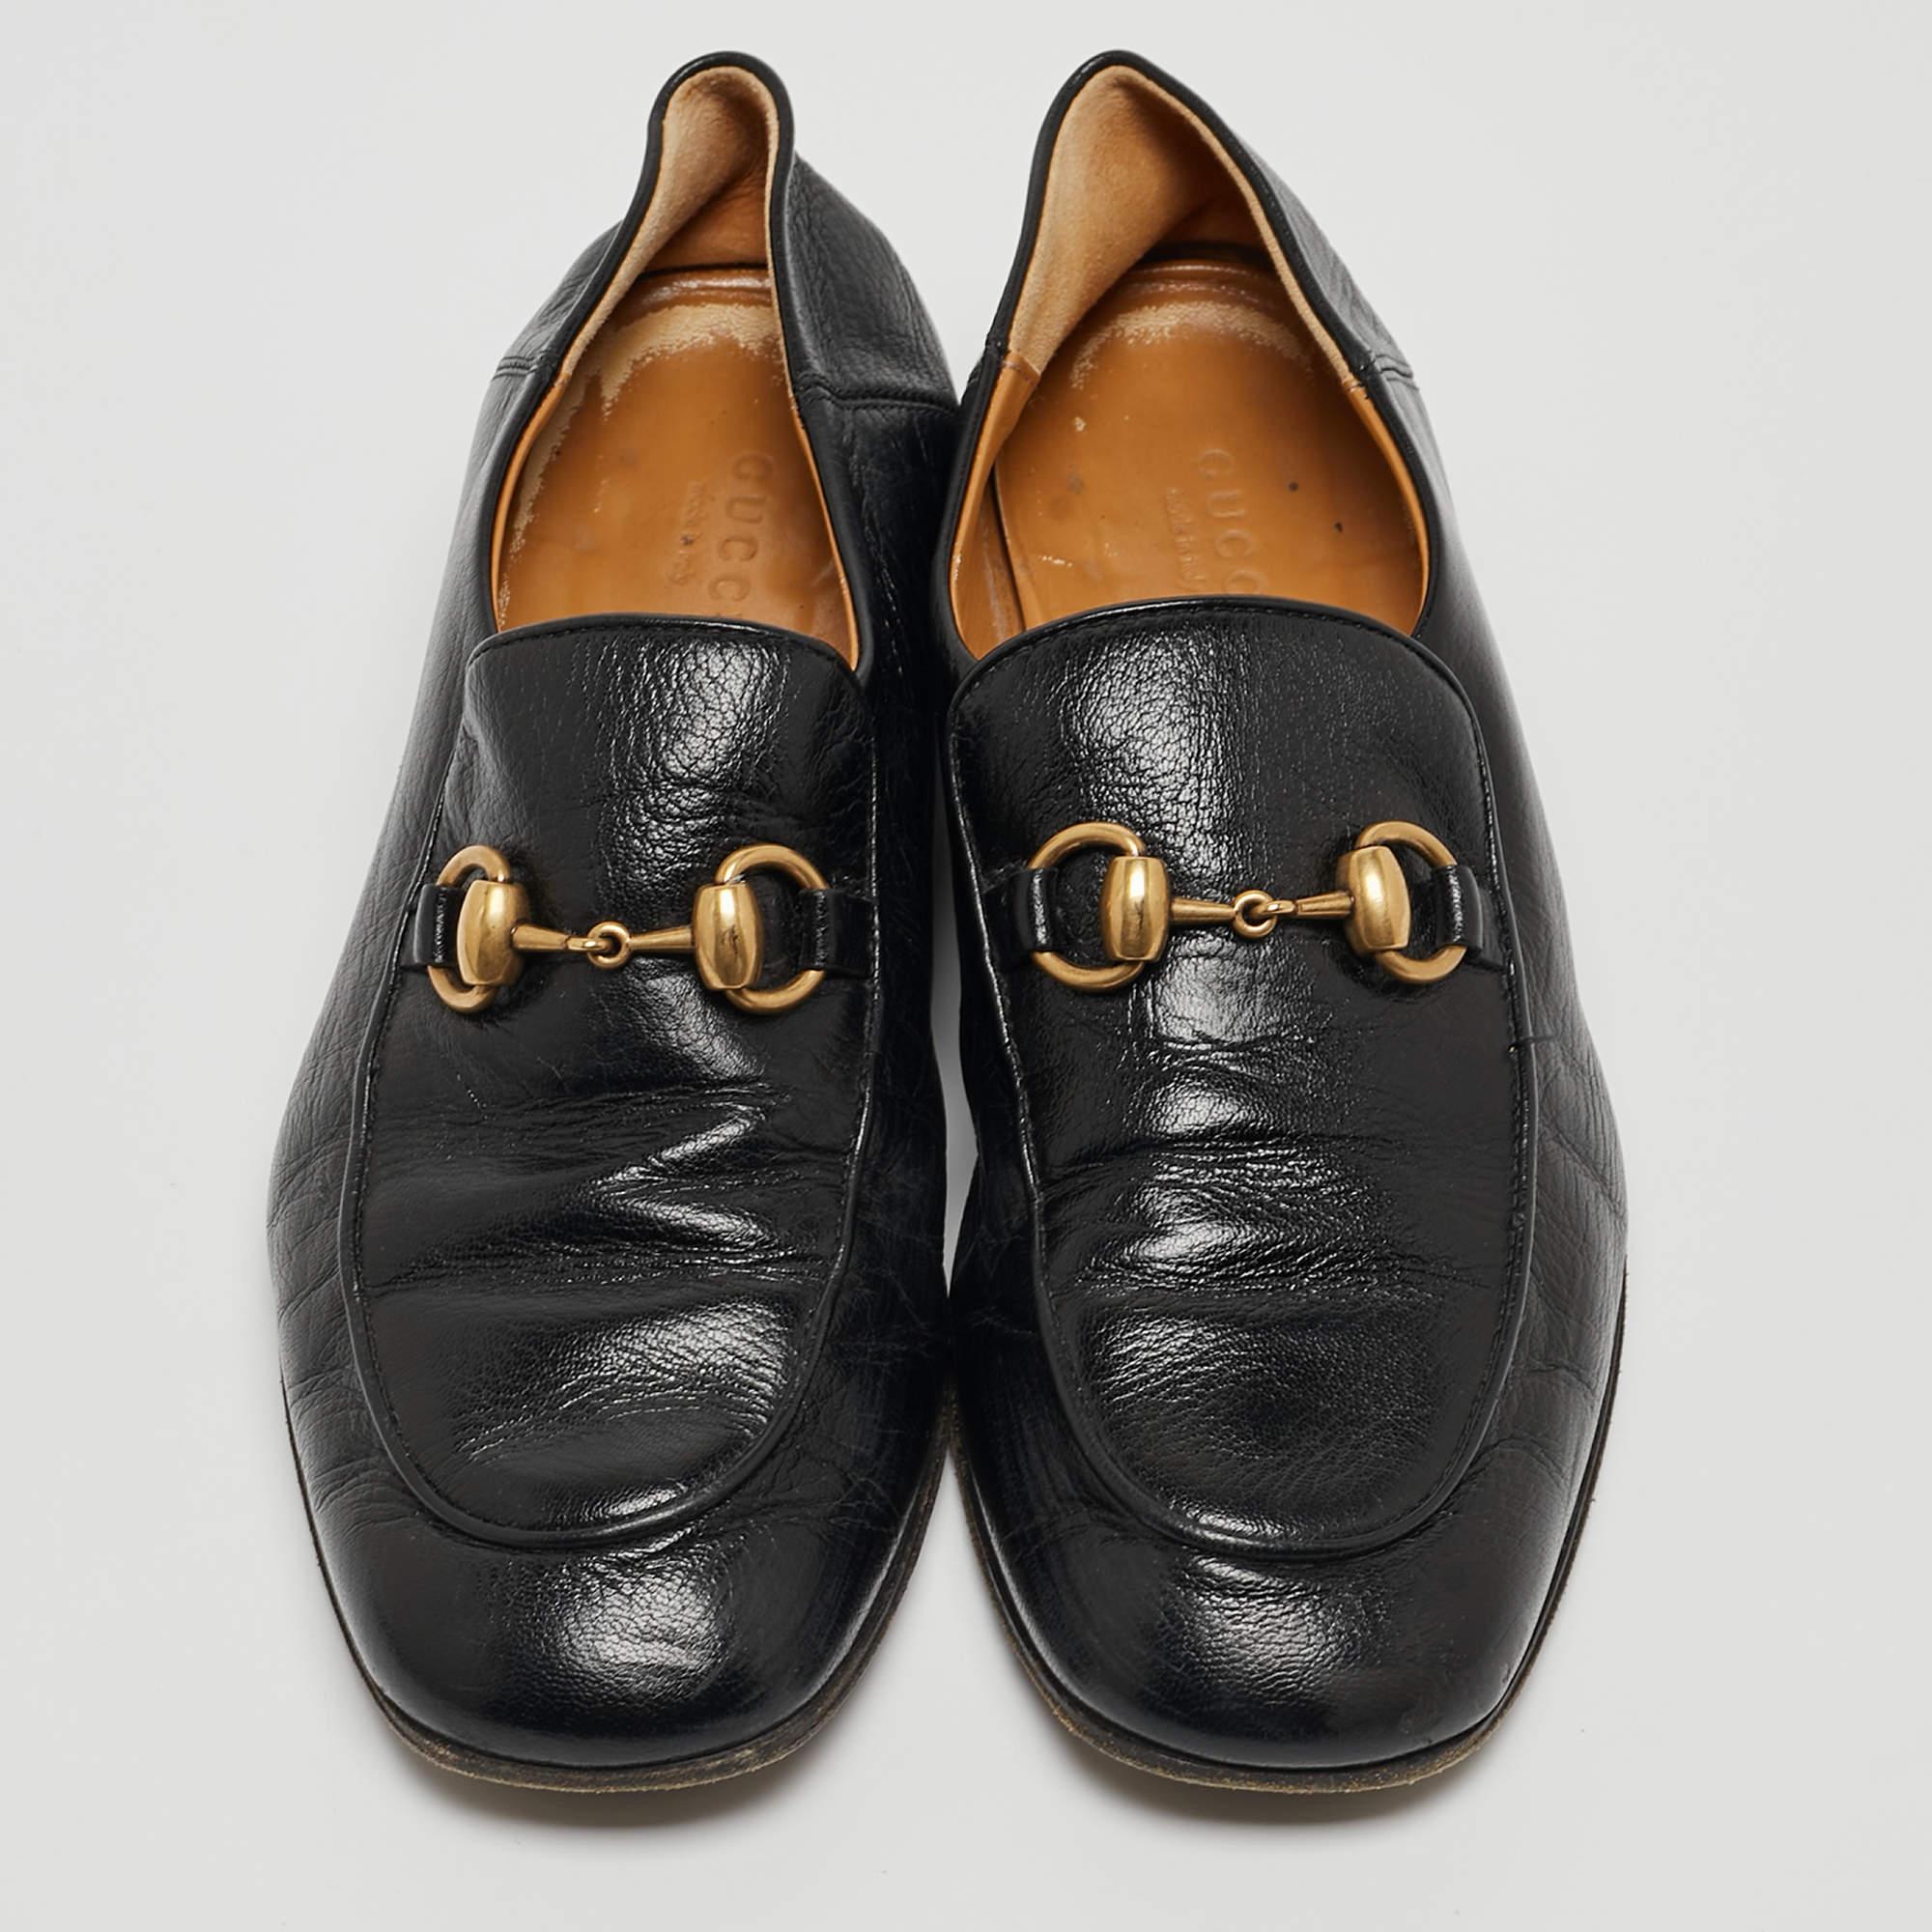 Gucci Black Leather Horsebit Loafers Size 36.5 4